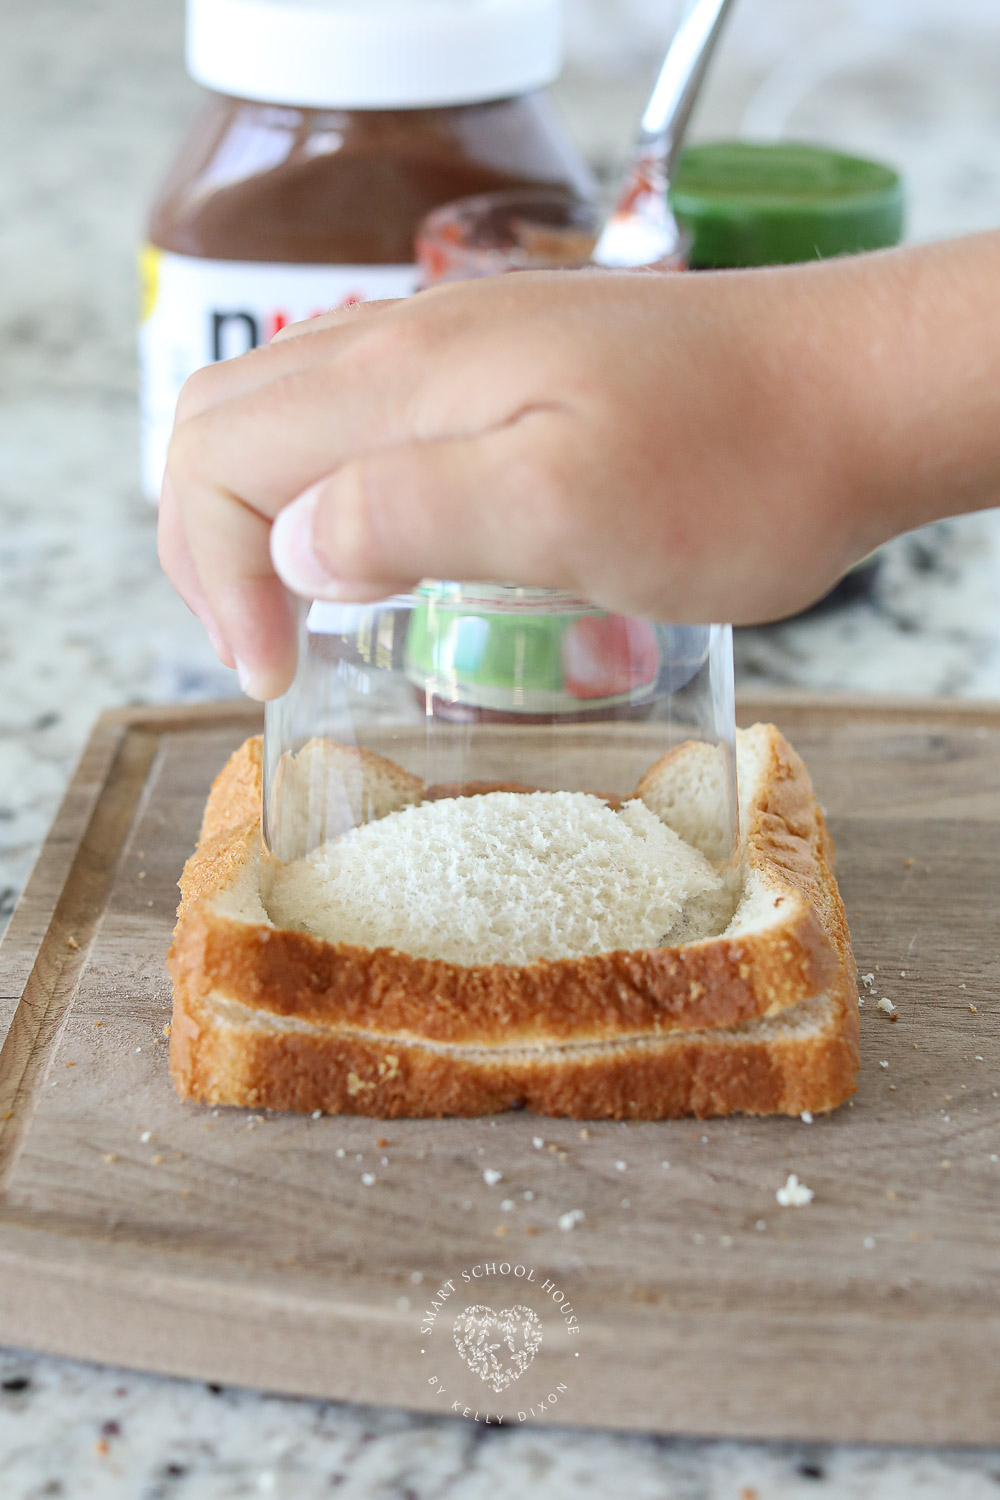 Make an Uncrustable with a cup